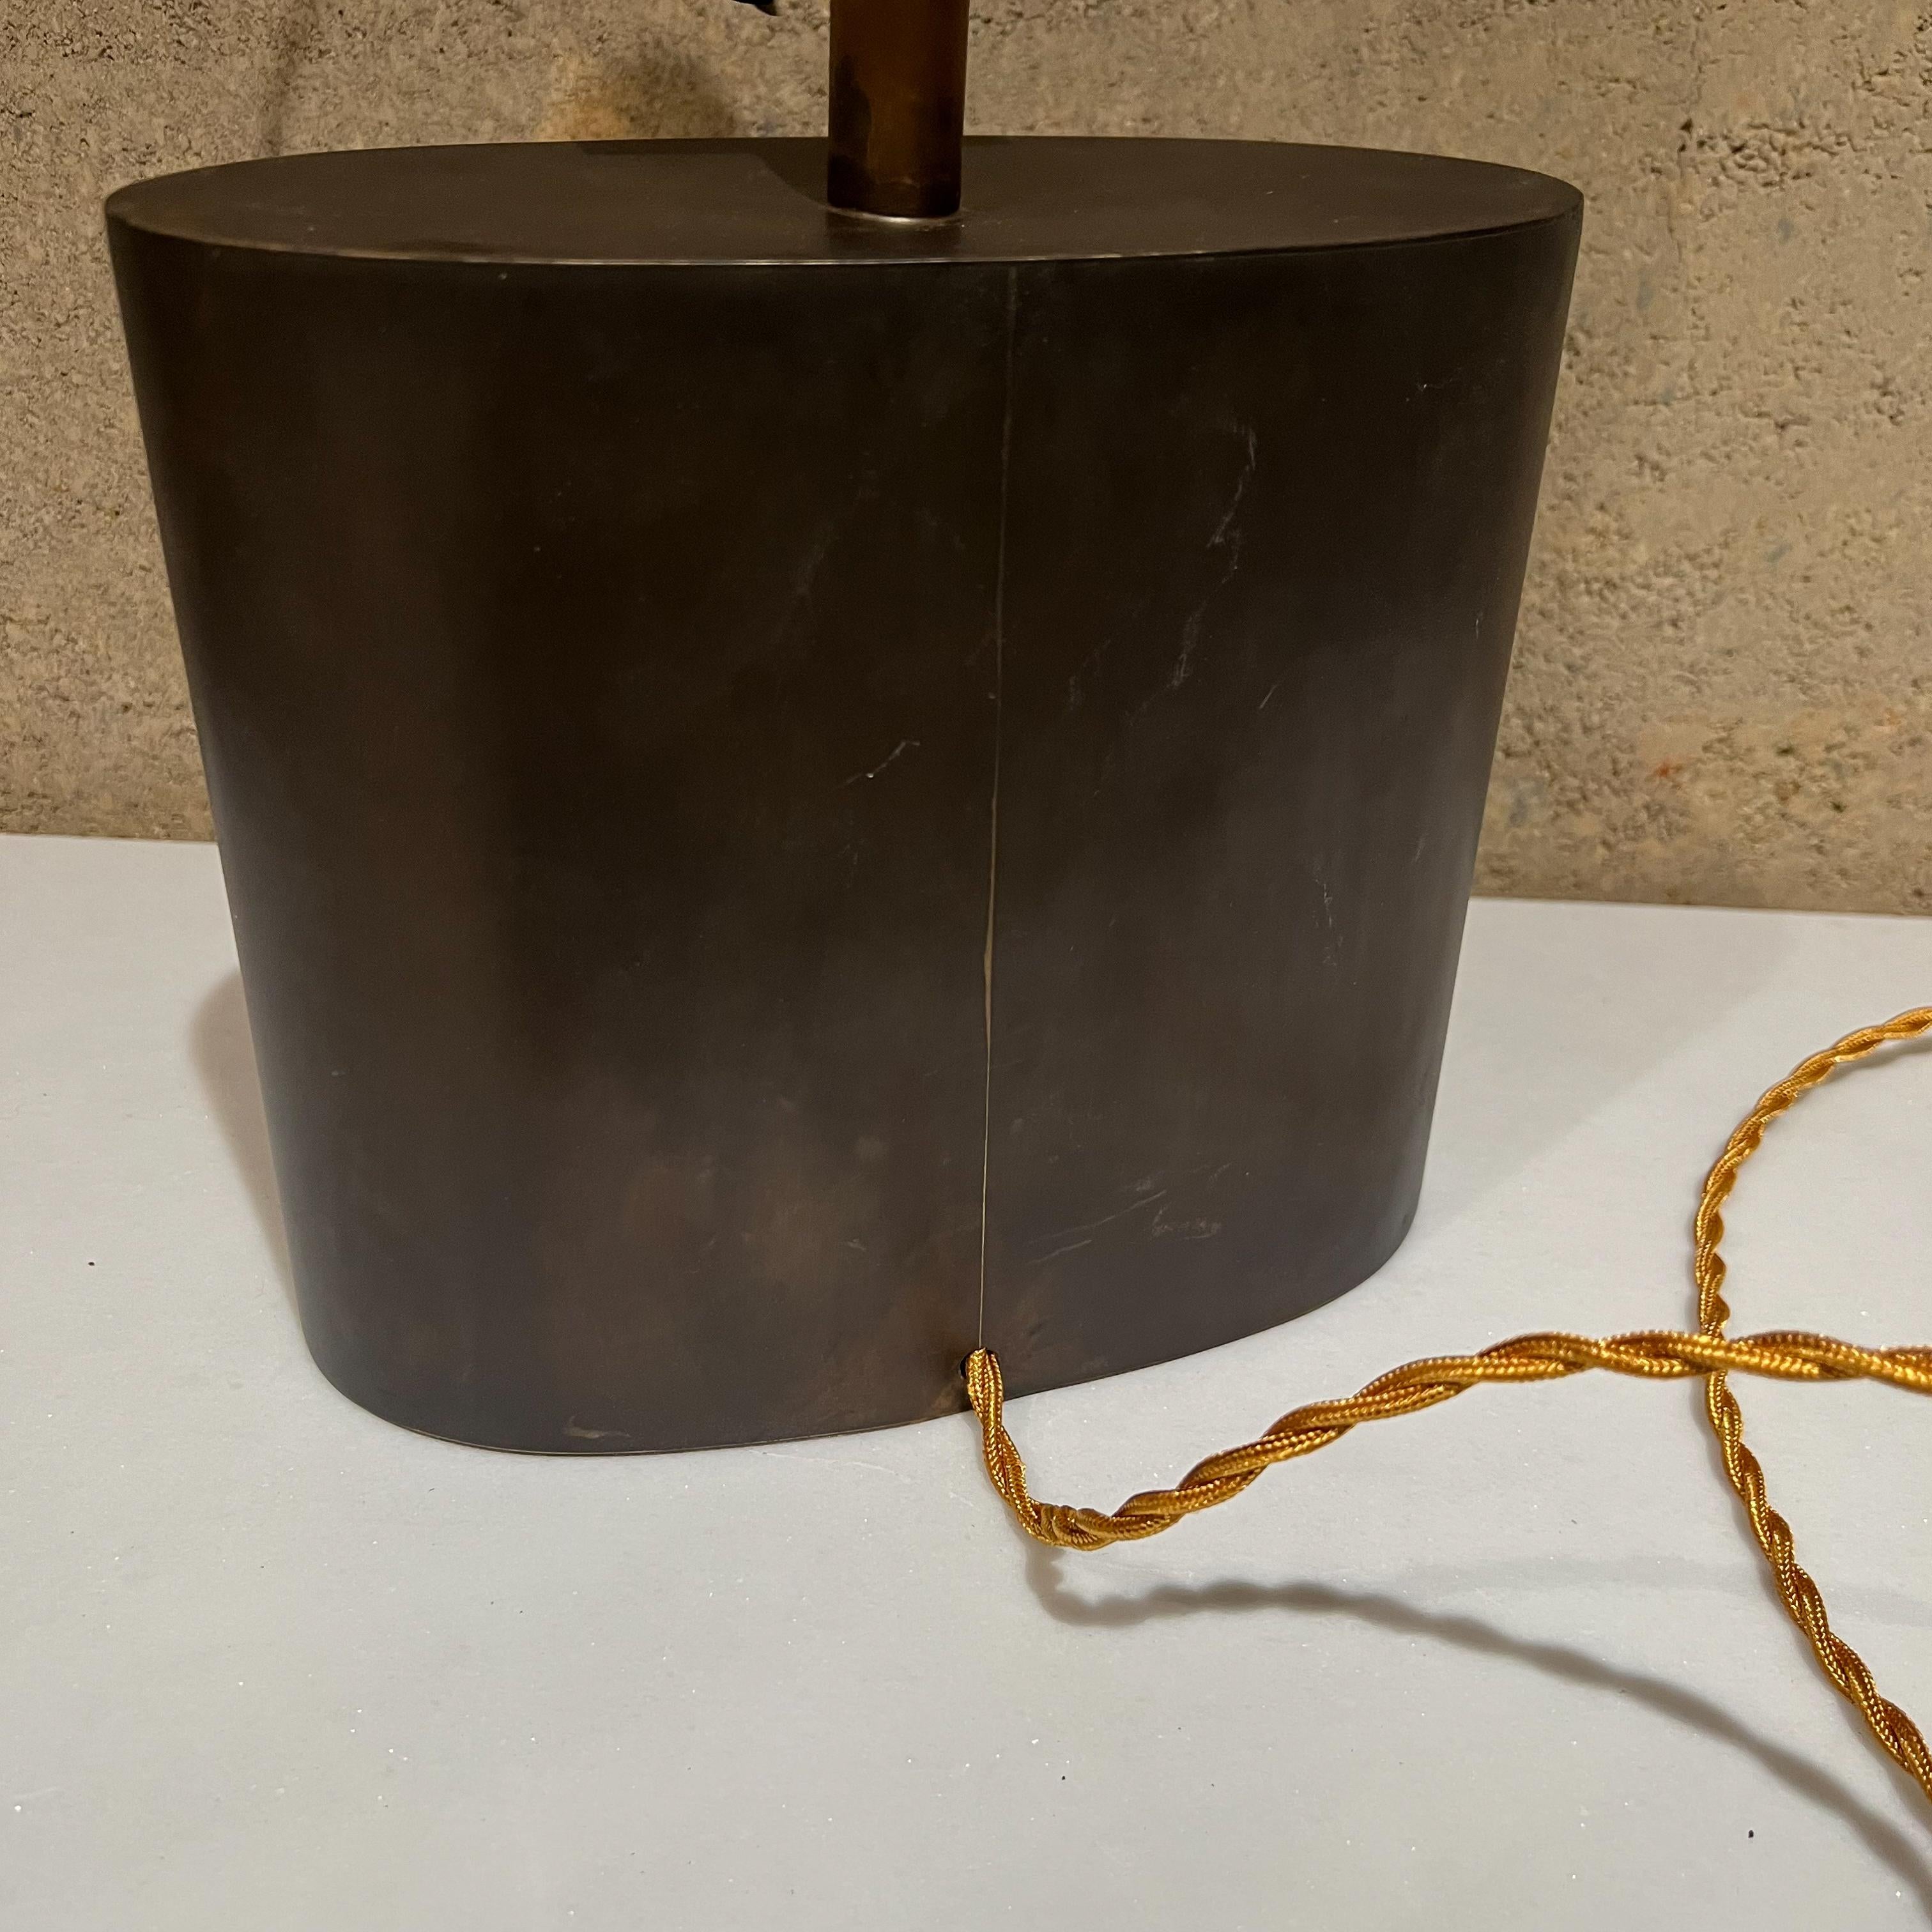 Table lamp
1950s Laris refined modern table lamp brass and copper elegant simplicity
Stamp appears as Laris
Decorative center brass plate
Measures: Socket 13.75 tall x 22 to top of finial 8.5 W x 4.25 D
Preowned vintage condition with new silk